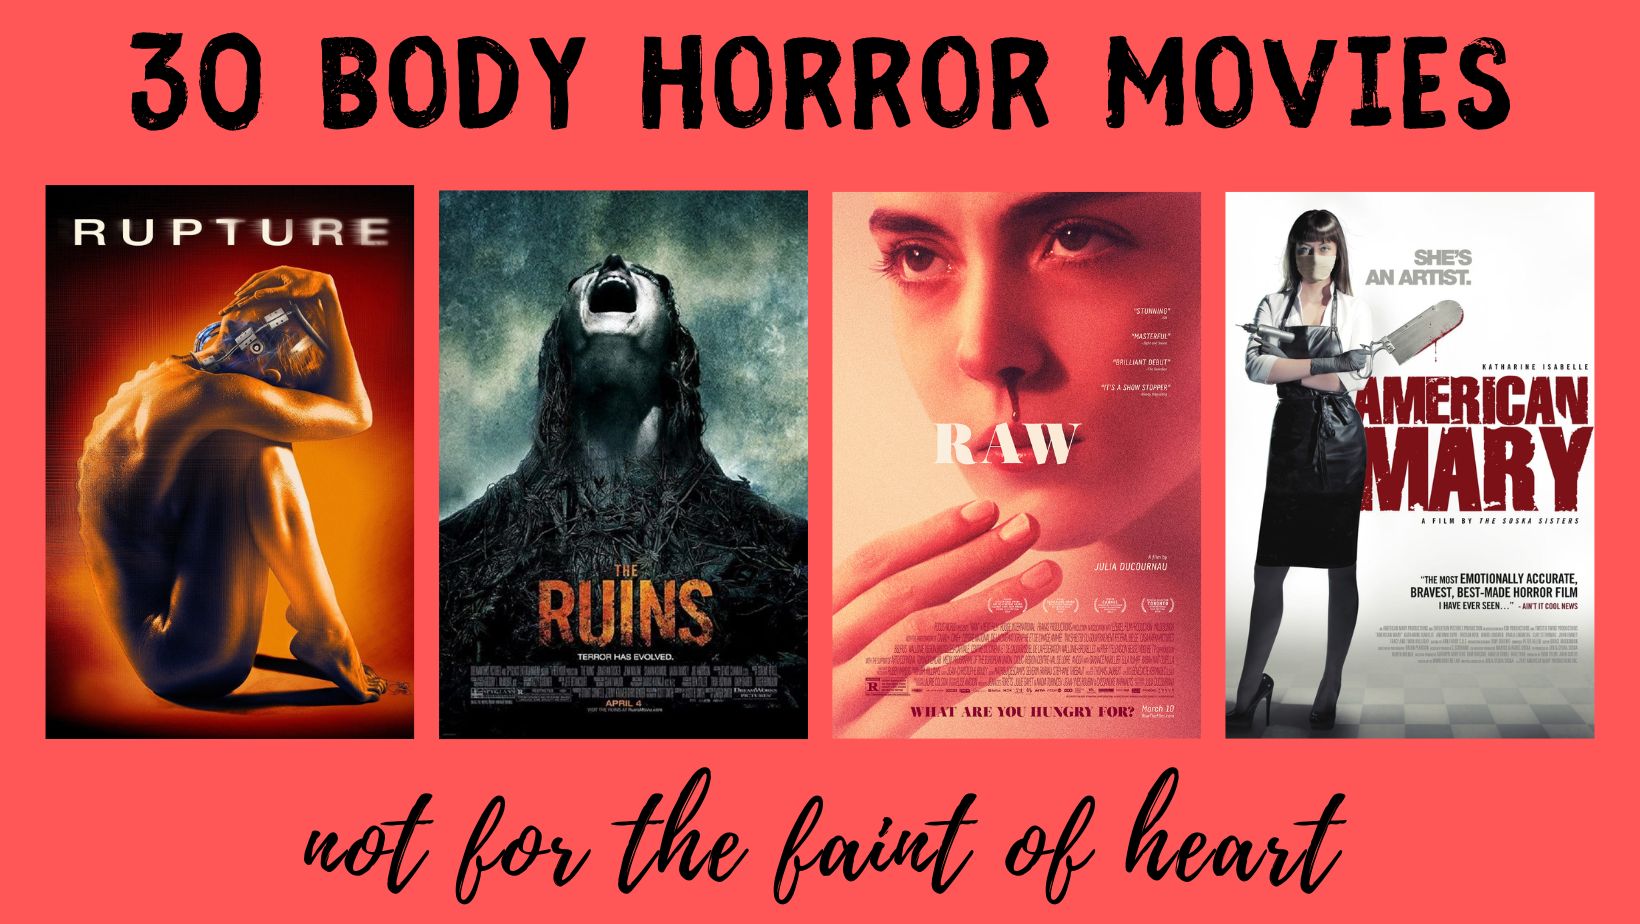 30 body horror movies, not for the faint of heart